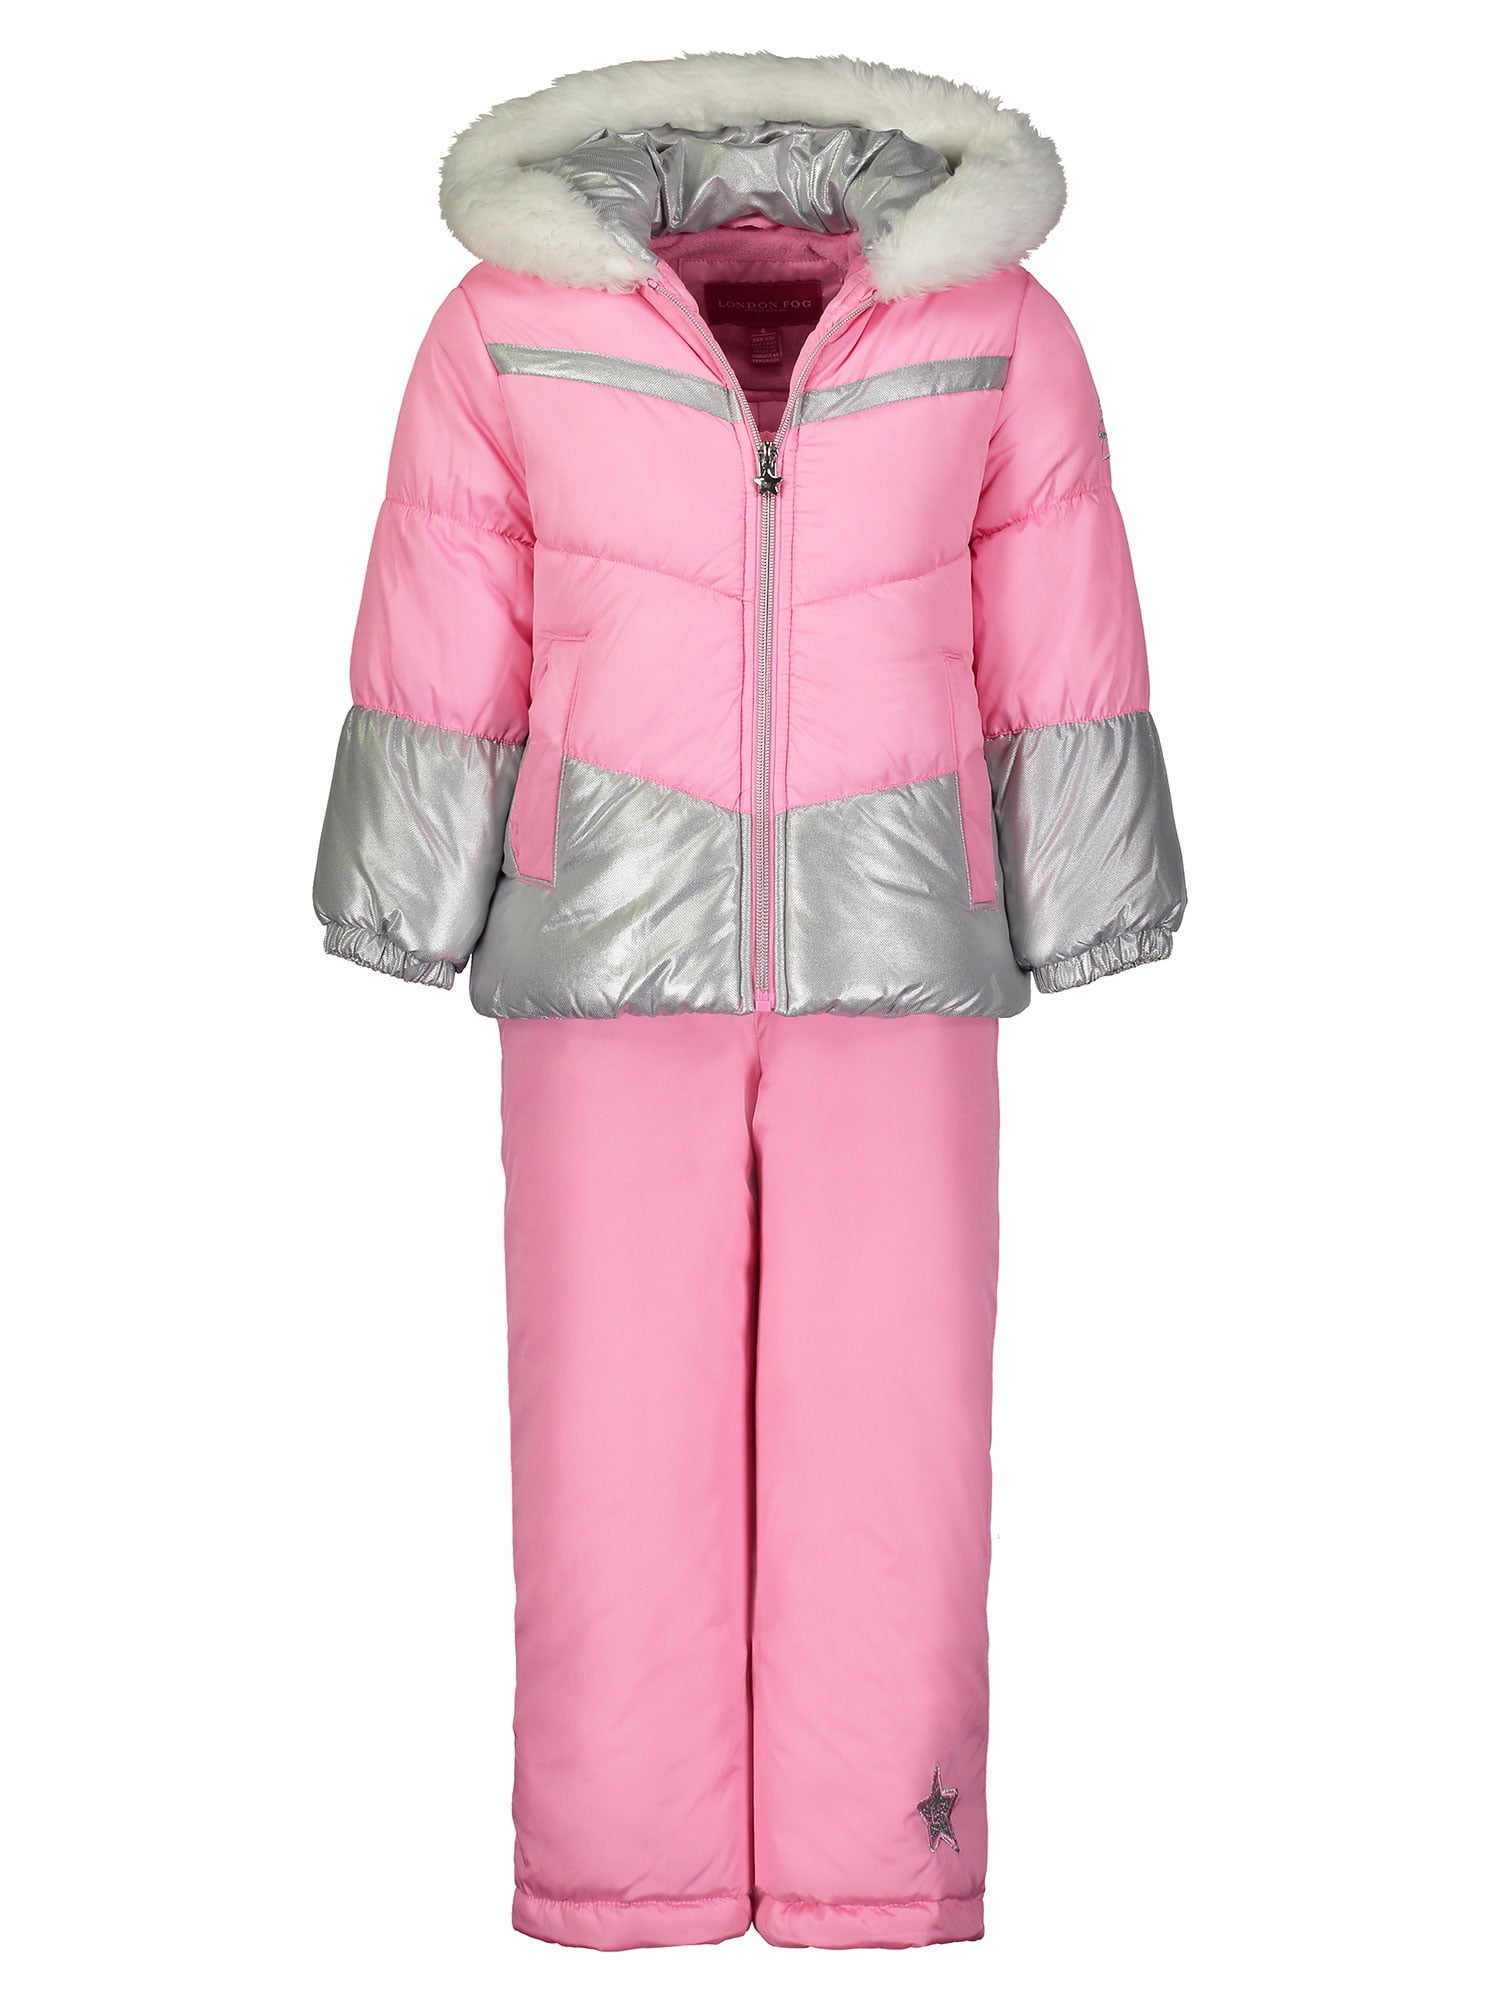 girls winter jacket and snow pants